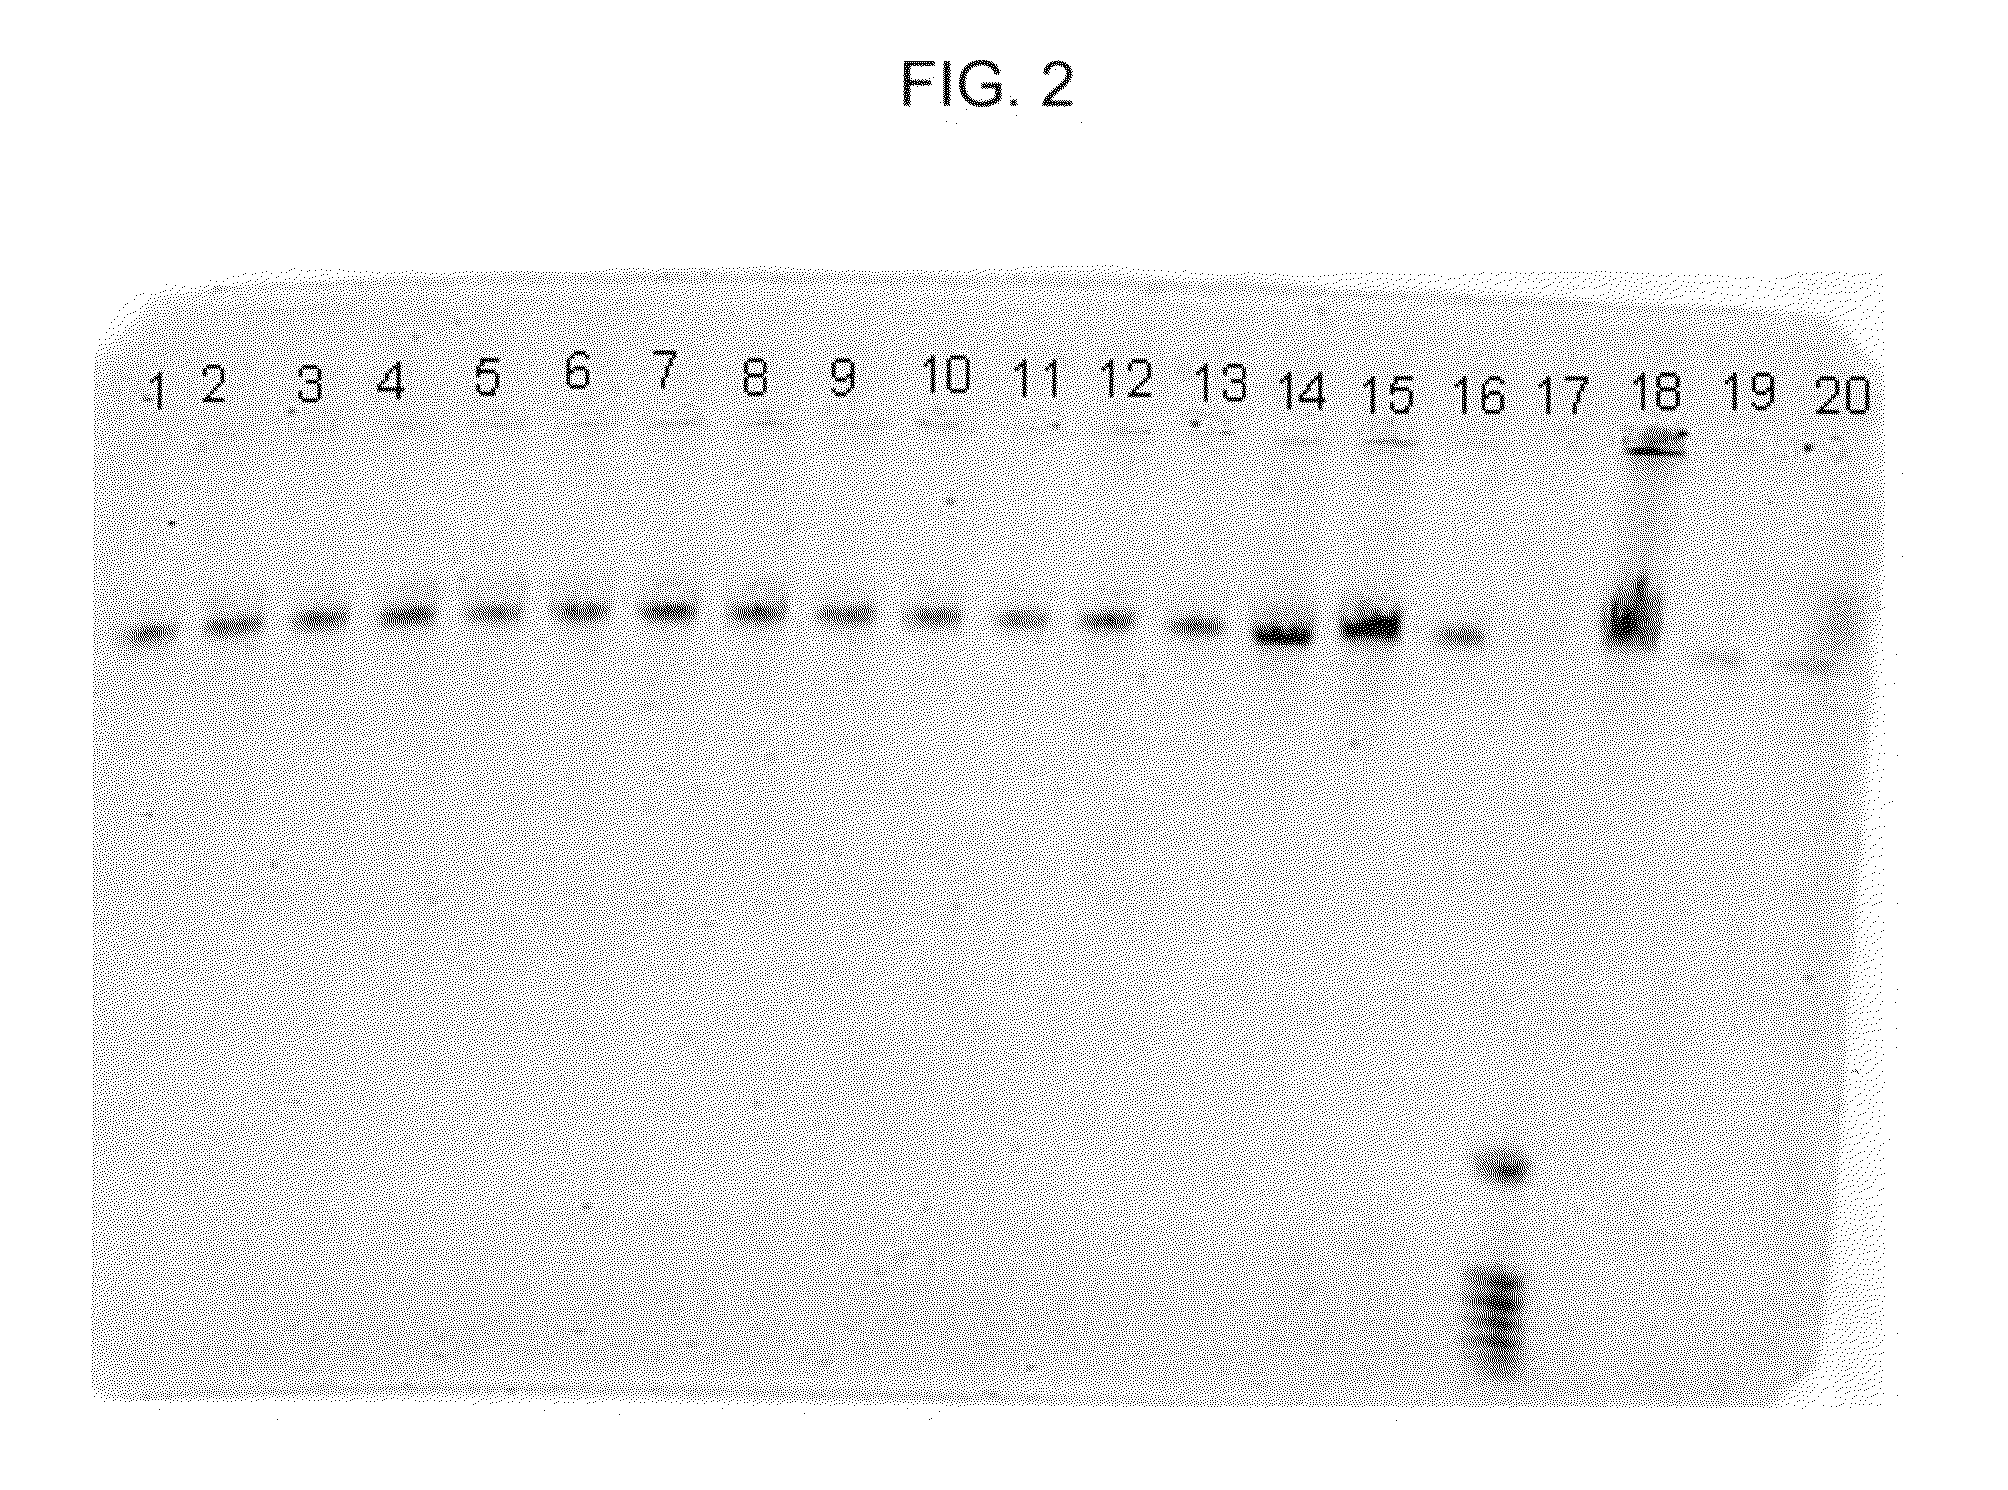 Methods of optimal purification of nucleic acids and kit for use in performing such methods